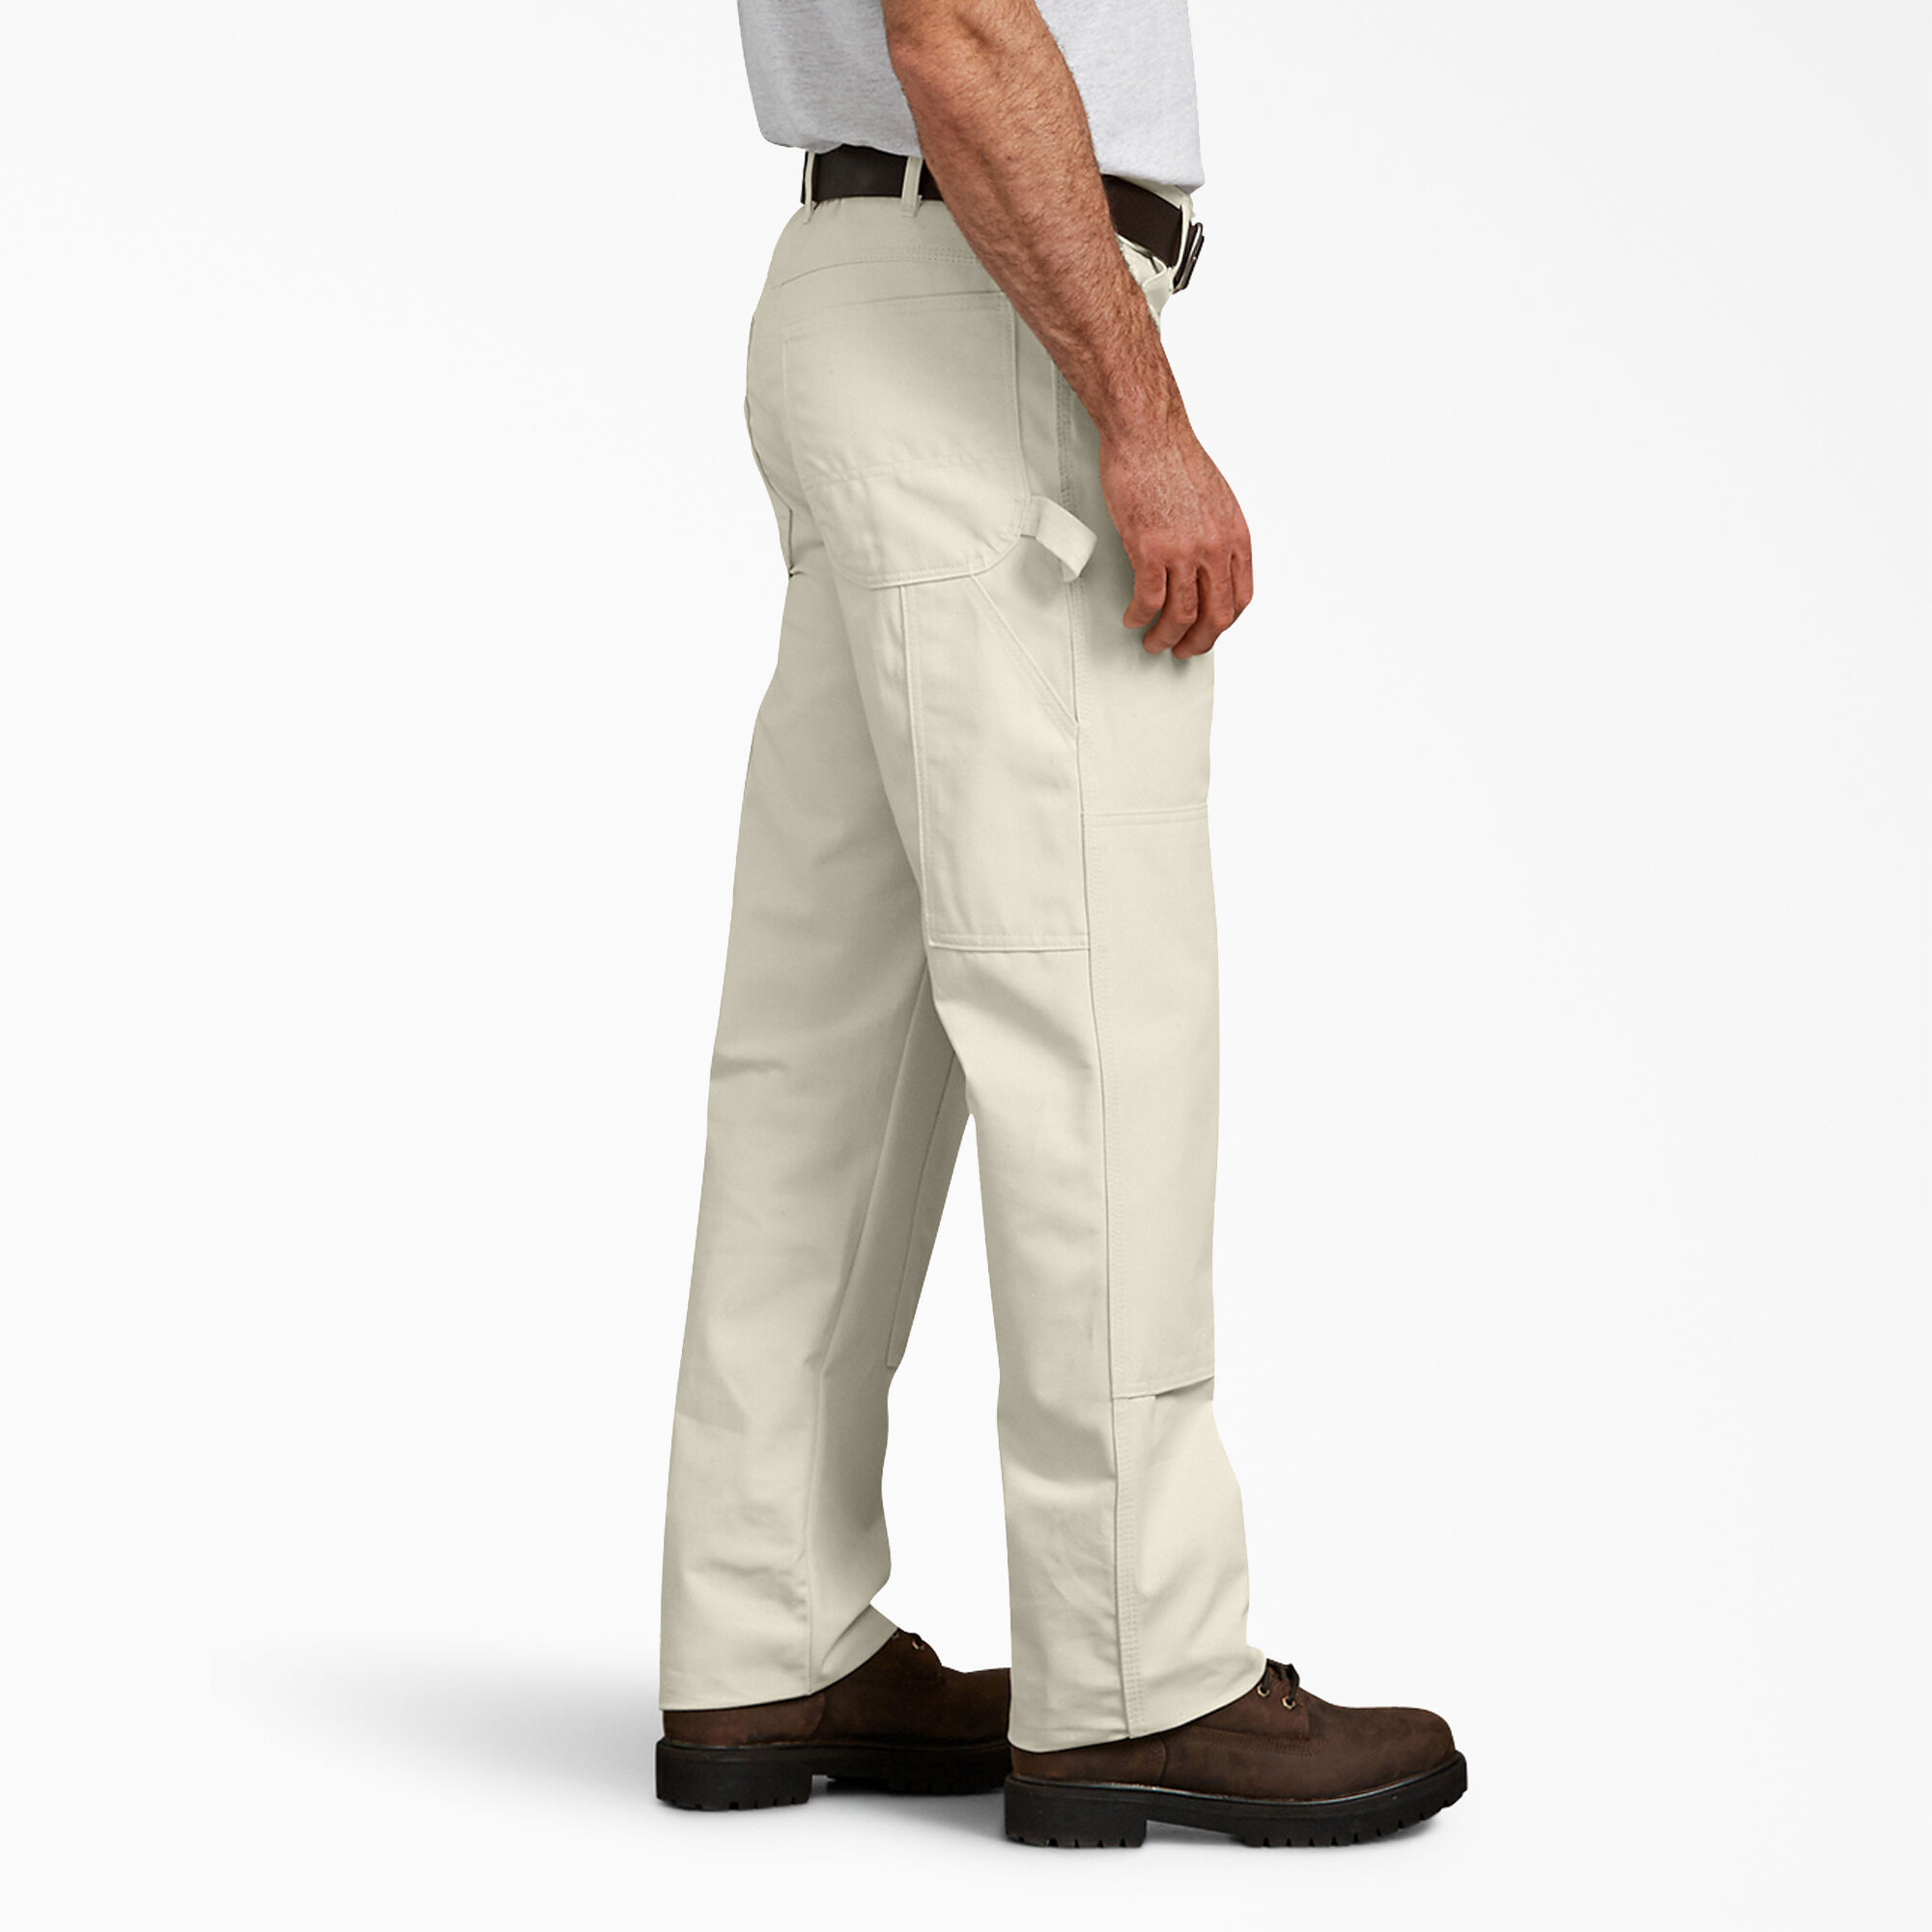 White Jeans for Men   Double Knee Utility   Dickies   Dickies US